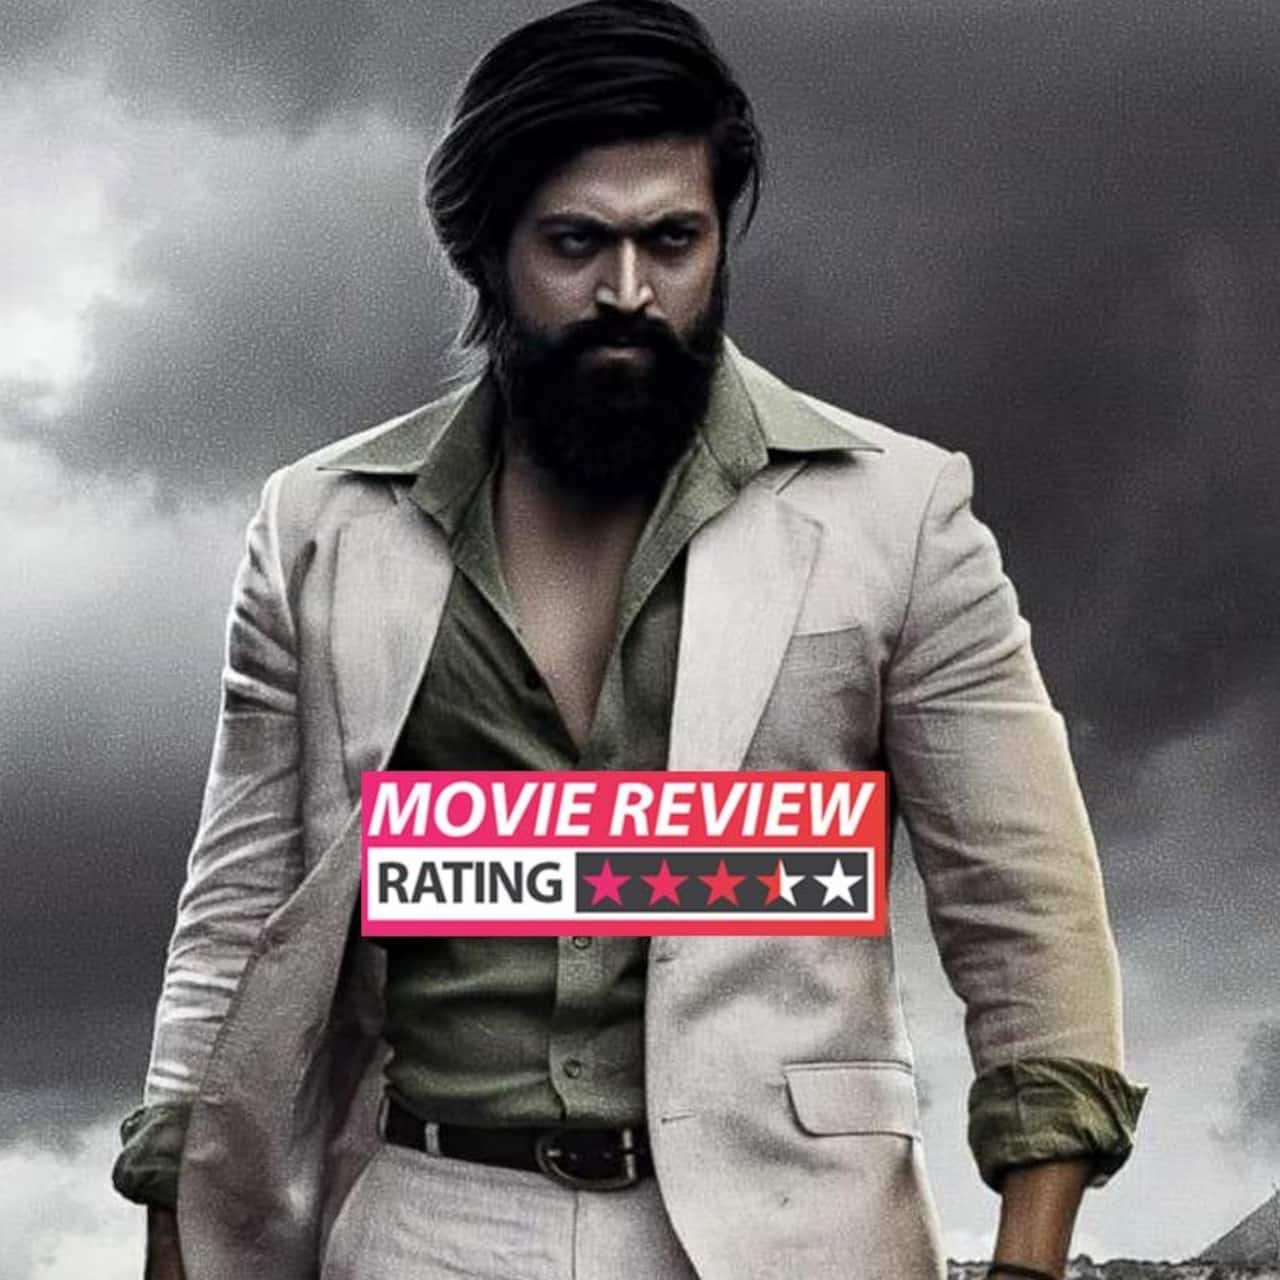 KGF 2 movie review: Yash and Prashanth Neel's film will leave you high with its adrenaline, machismo and unbridled entertainment